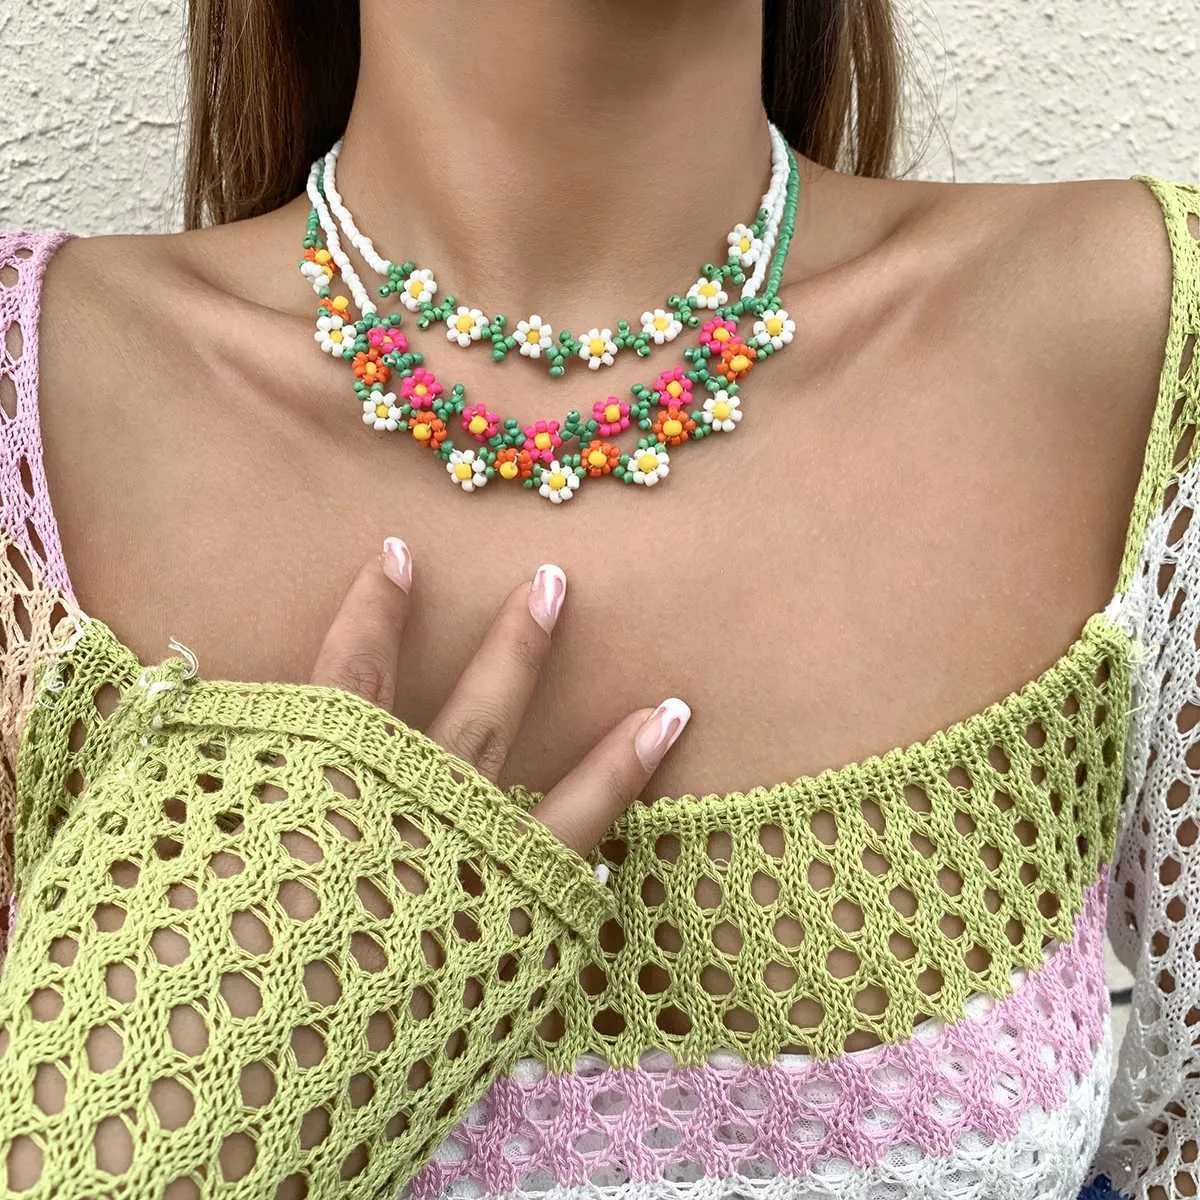 Chokers Salircon Trend Bohemia Rainbow Color Seed Beads Chain Choker Necklace For Women Korean Fashion Small Flowers Accessories Jewelry Y2303